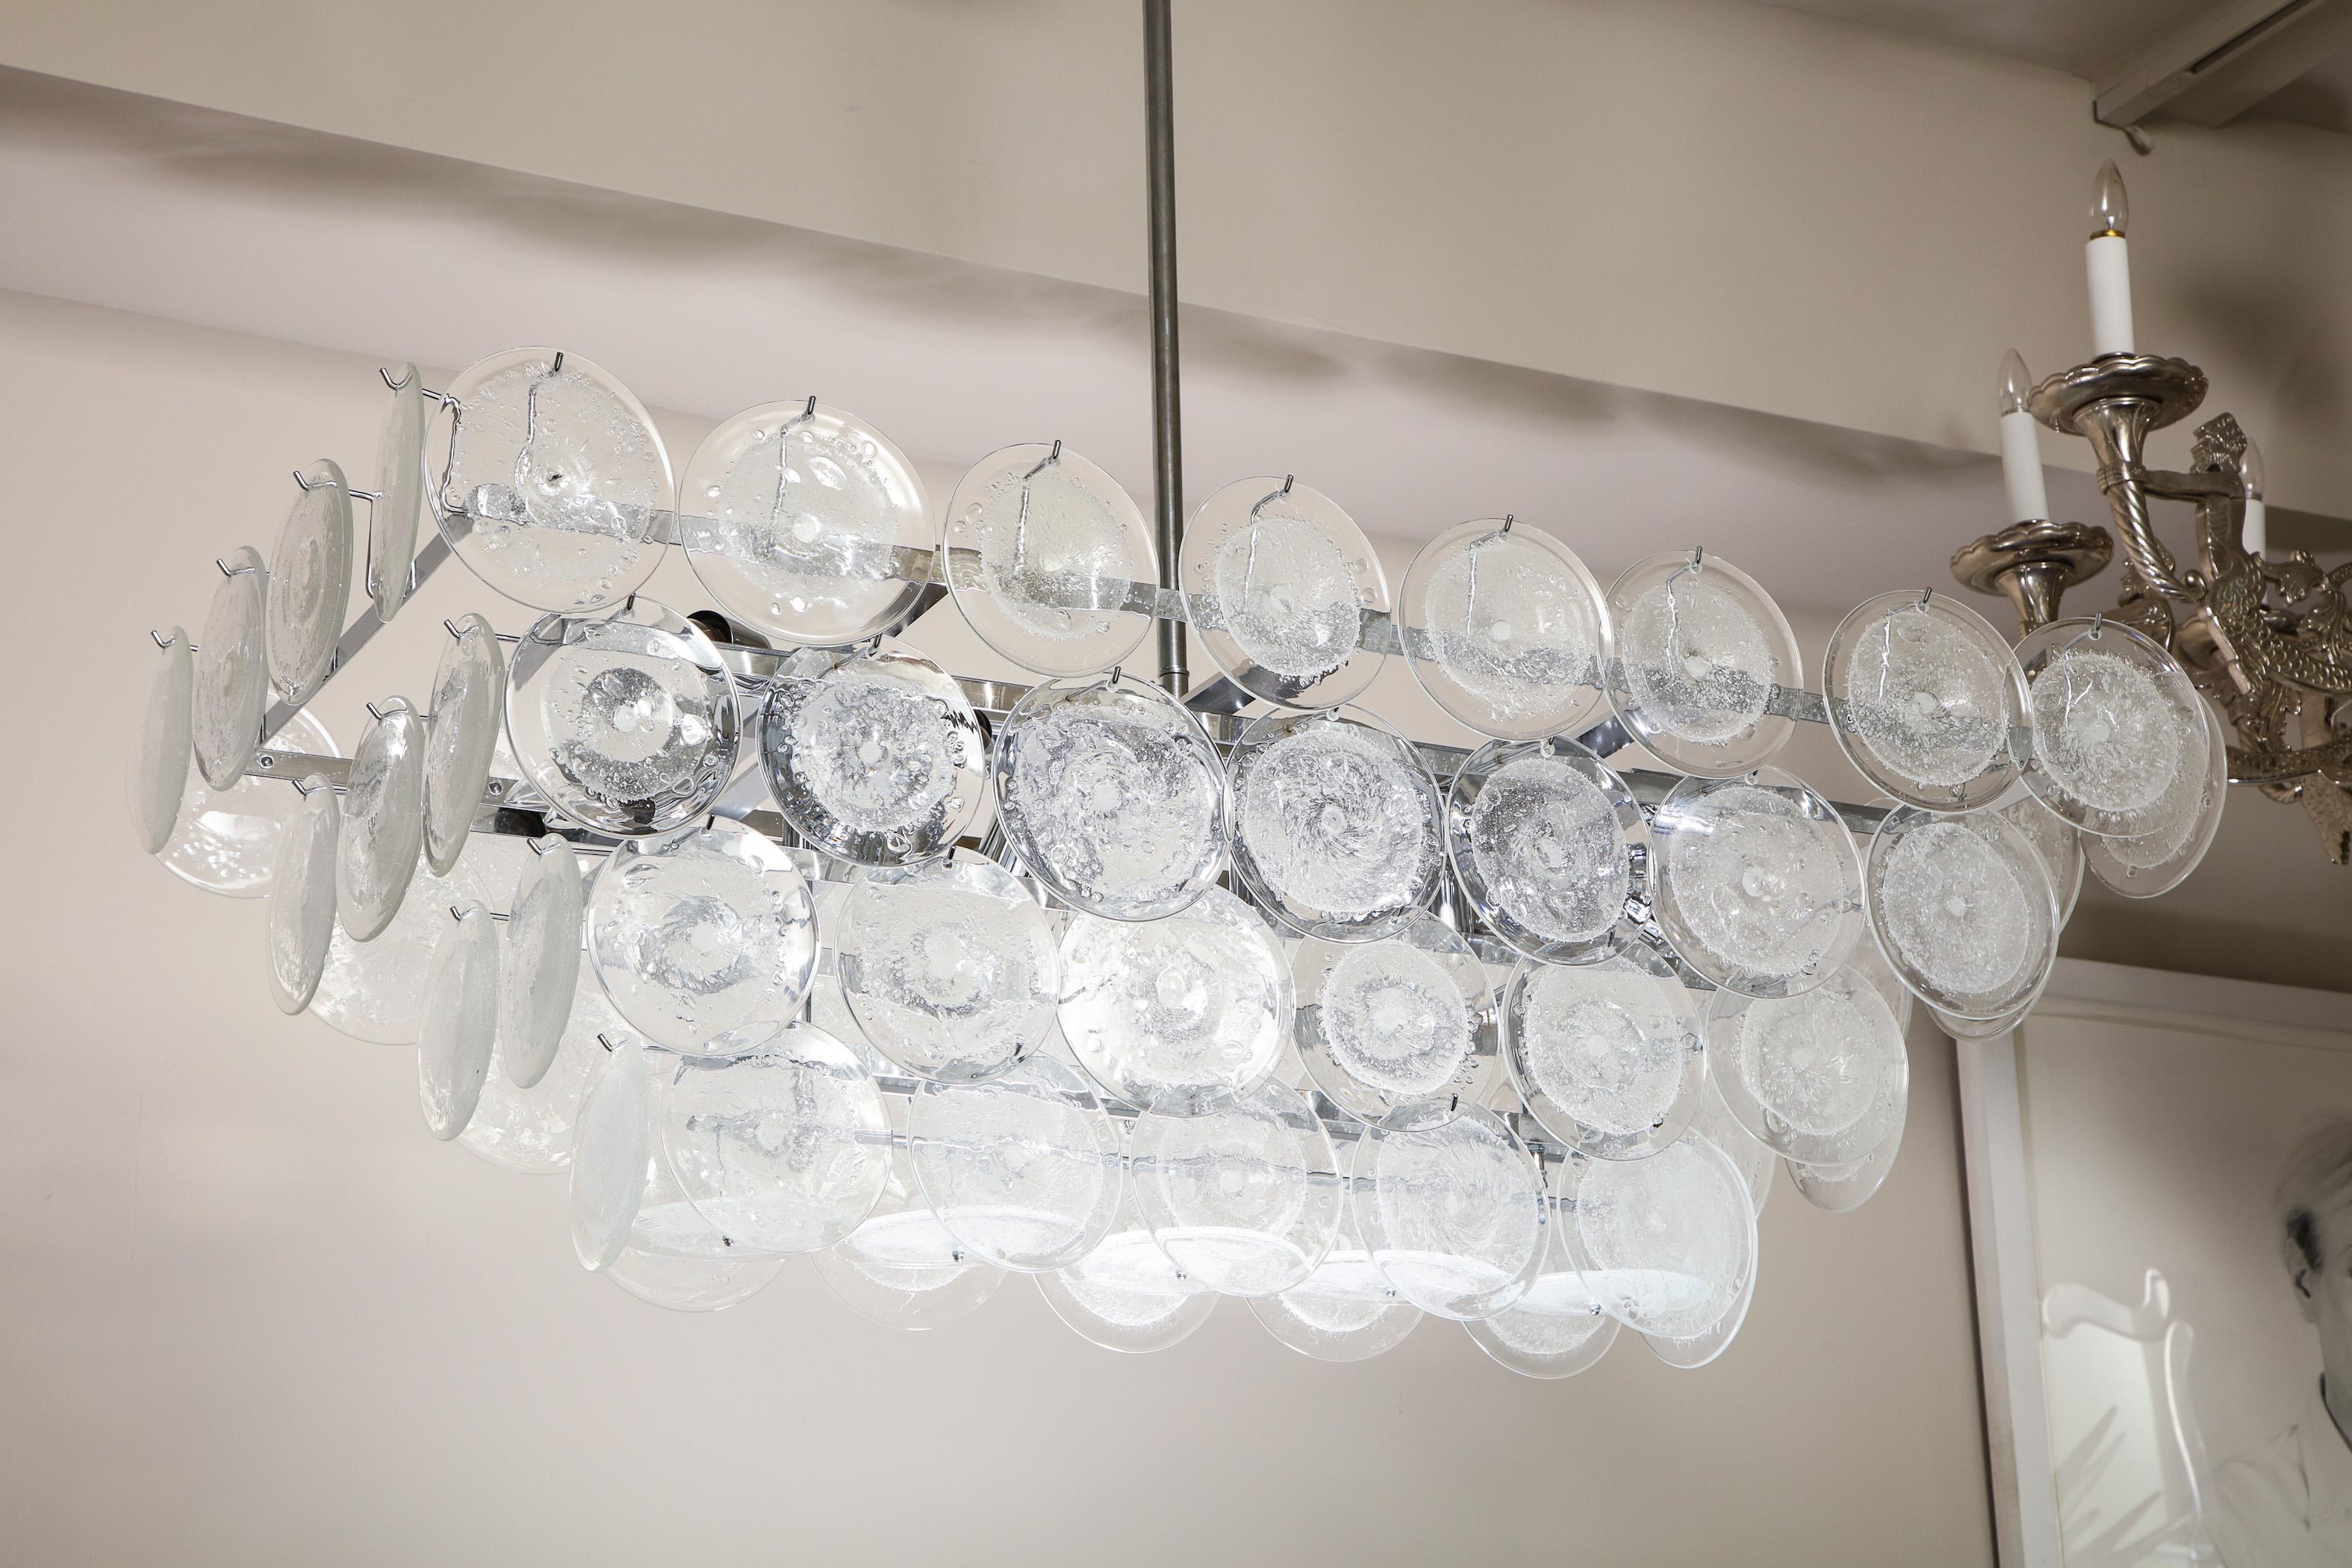 Custom clear bubble Murano glass disc chandelier in a rectangle shape and chrome finish. Each glass piece is handmade in Murano, Italy. 18 candelabra sockets to illuminate for the size listed. Customization is available for different sizes, finishes